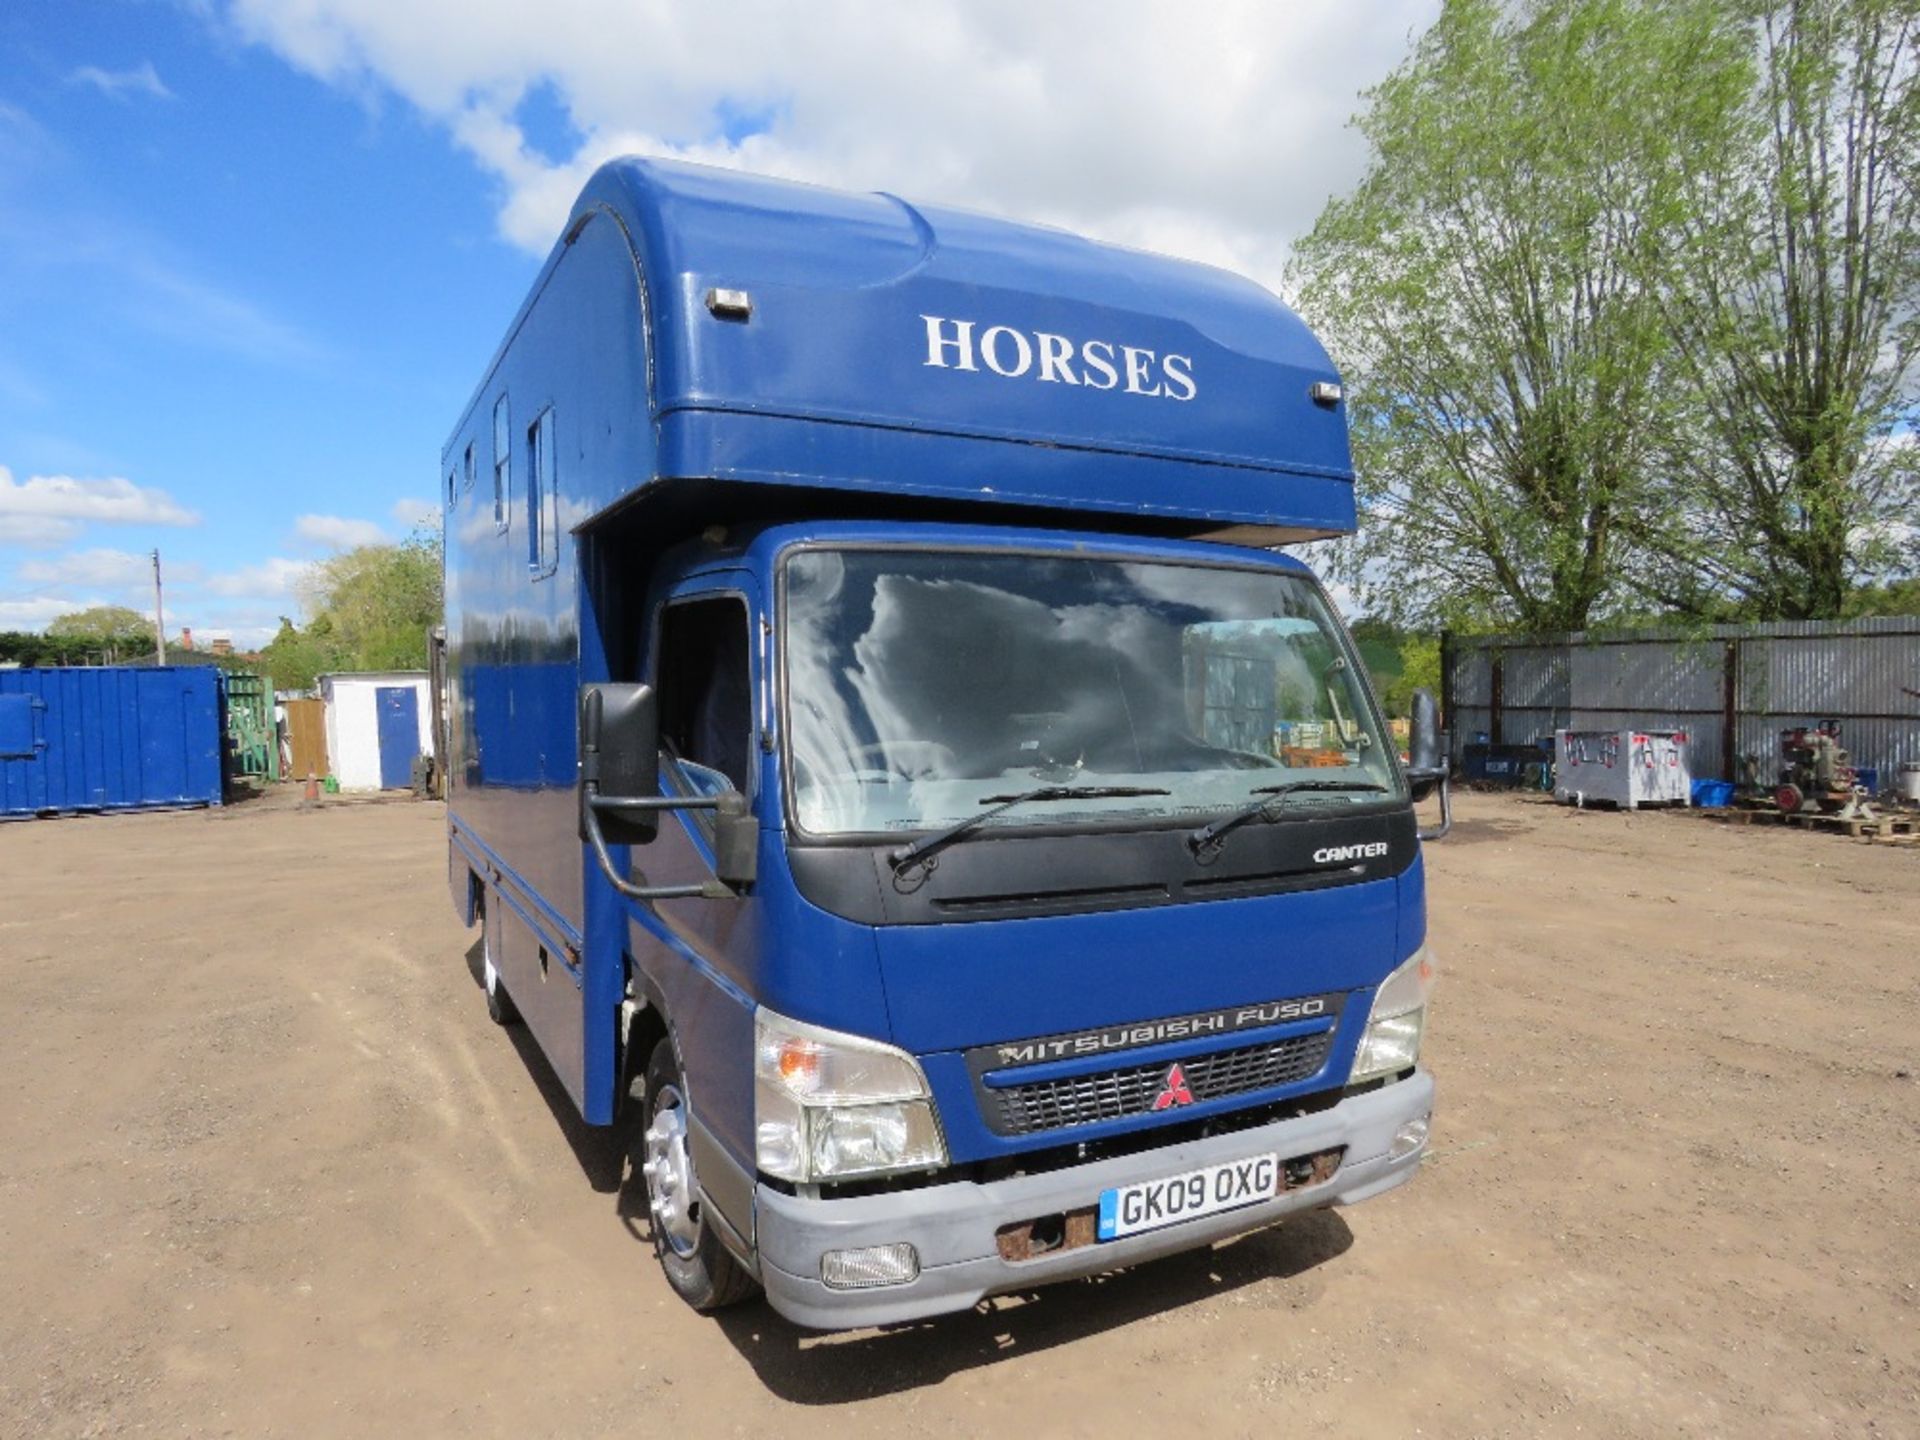 MITSUBISHI CANTER HORSE BOX LORRY REG:GK09 OXG. V5 AND PLATING CERTIFICATE IN OFFICE. MOT EXPIRED. - Bild 2 aus 24